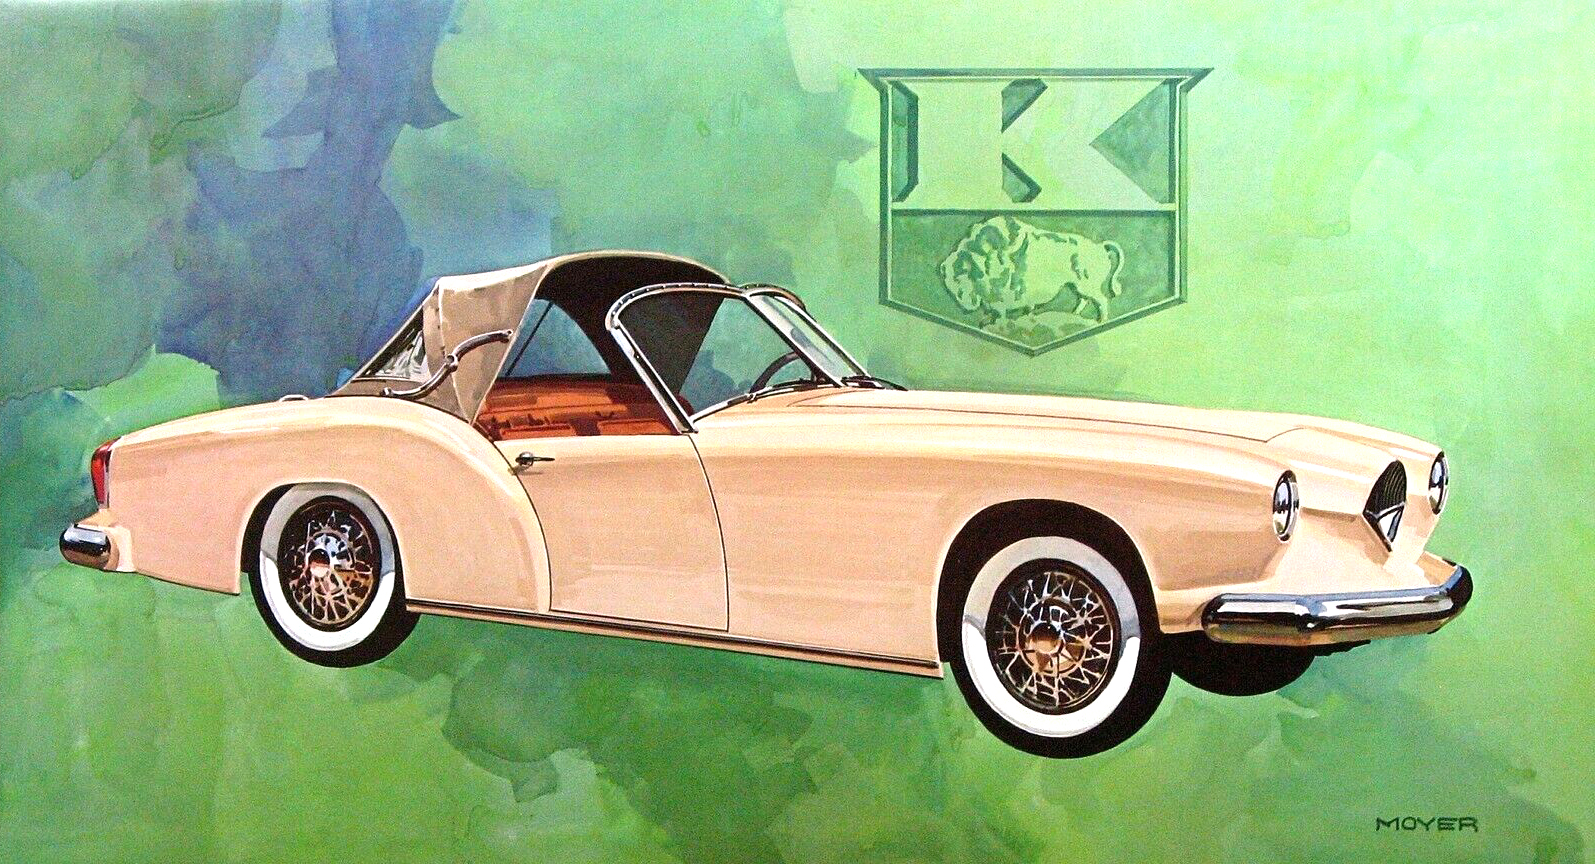  1952 Kaiser-Darrin — First production car to have fiber-glass reinforced plastic body: Illustrated by Robert M. Moyer